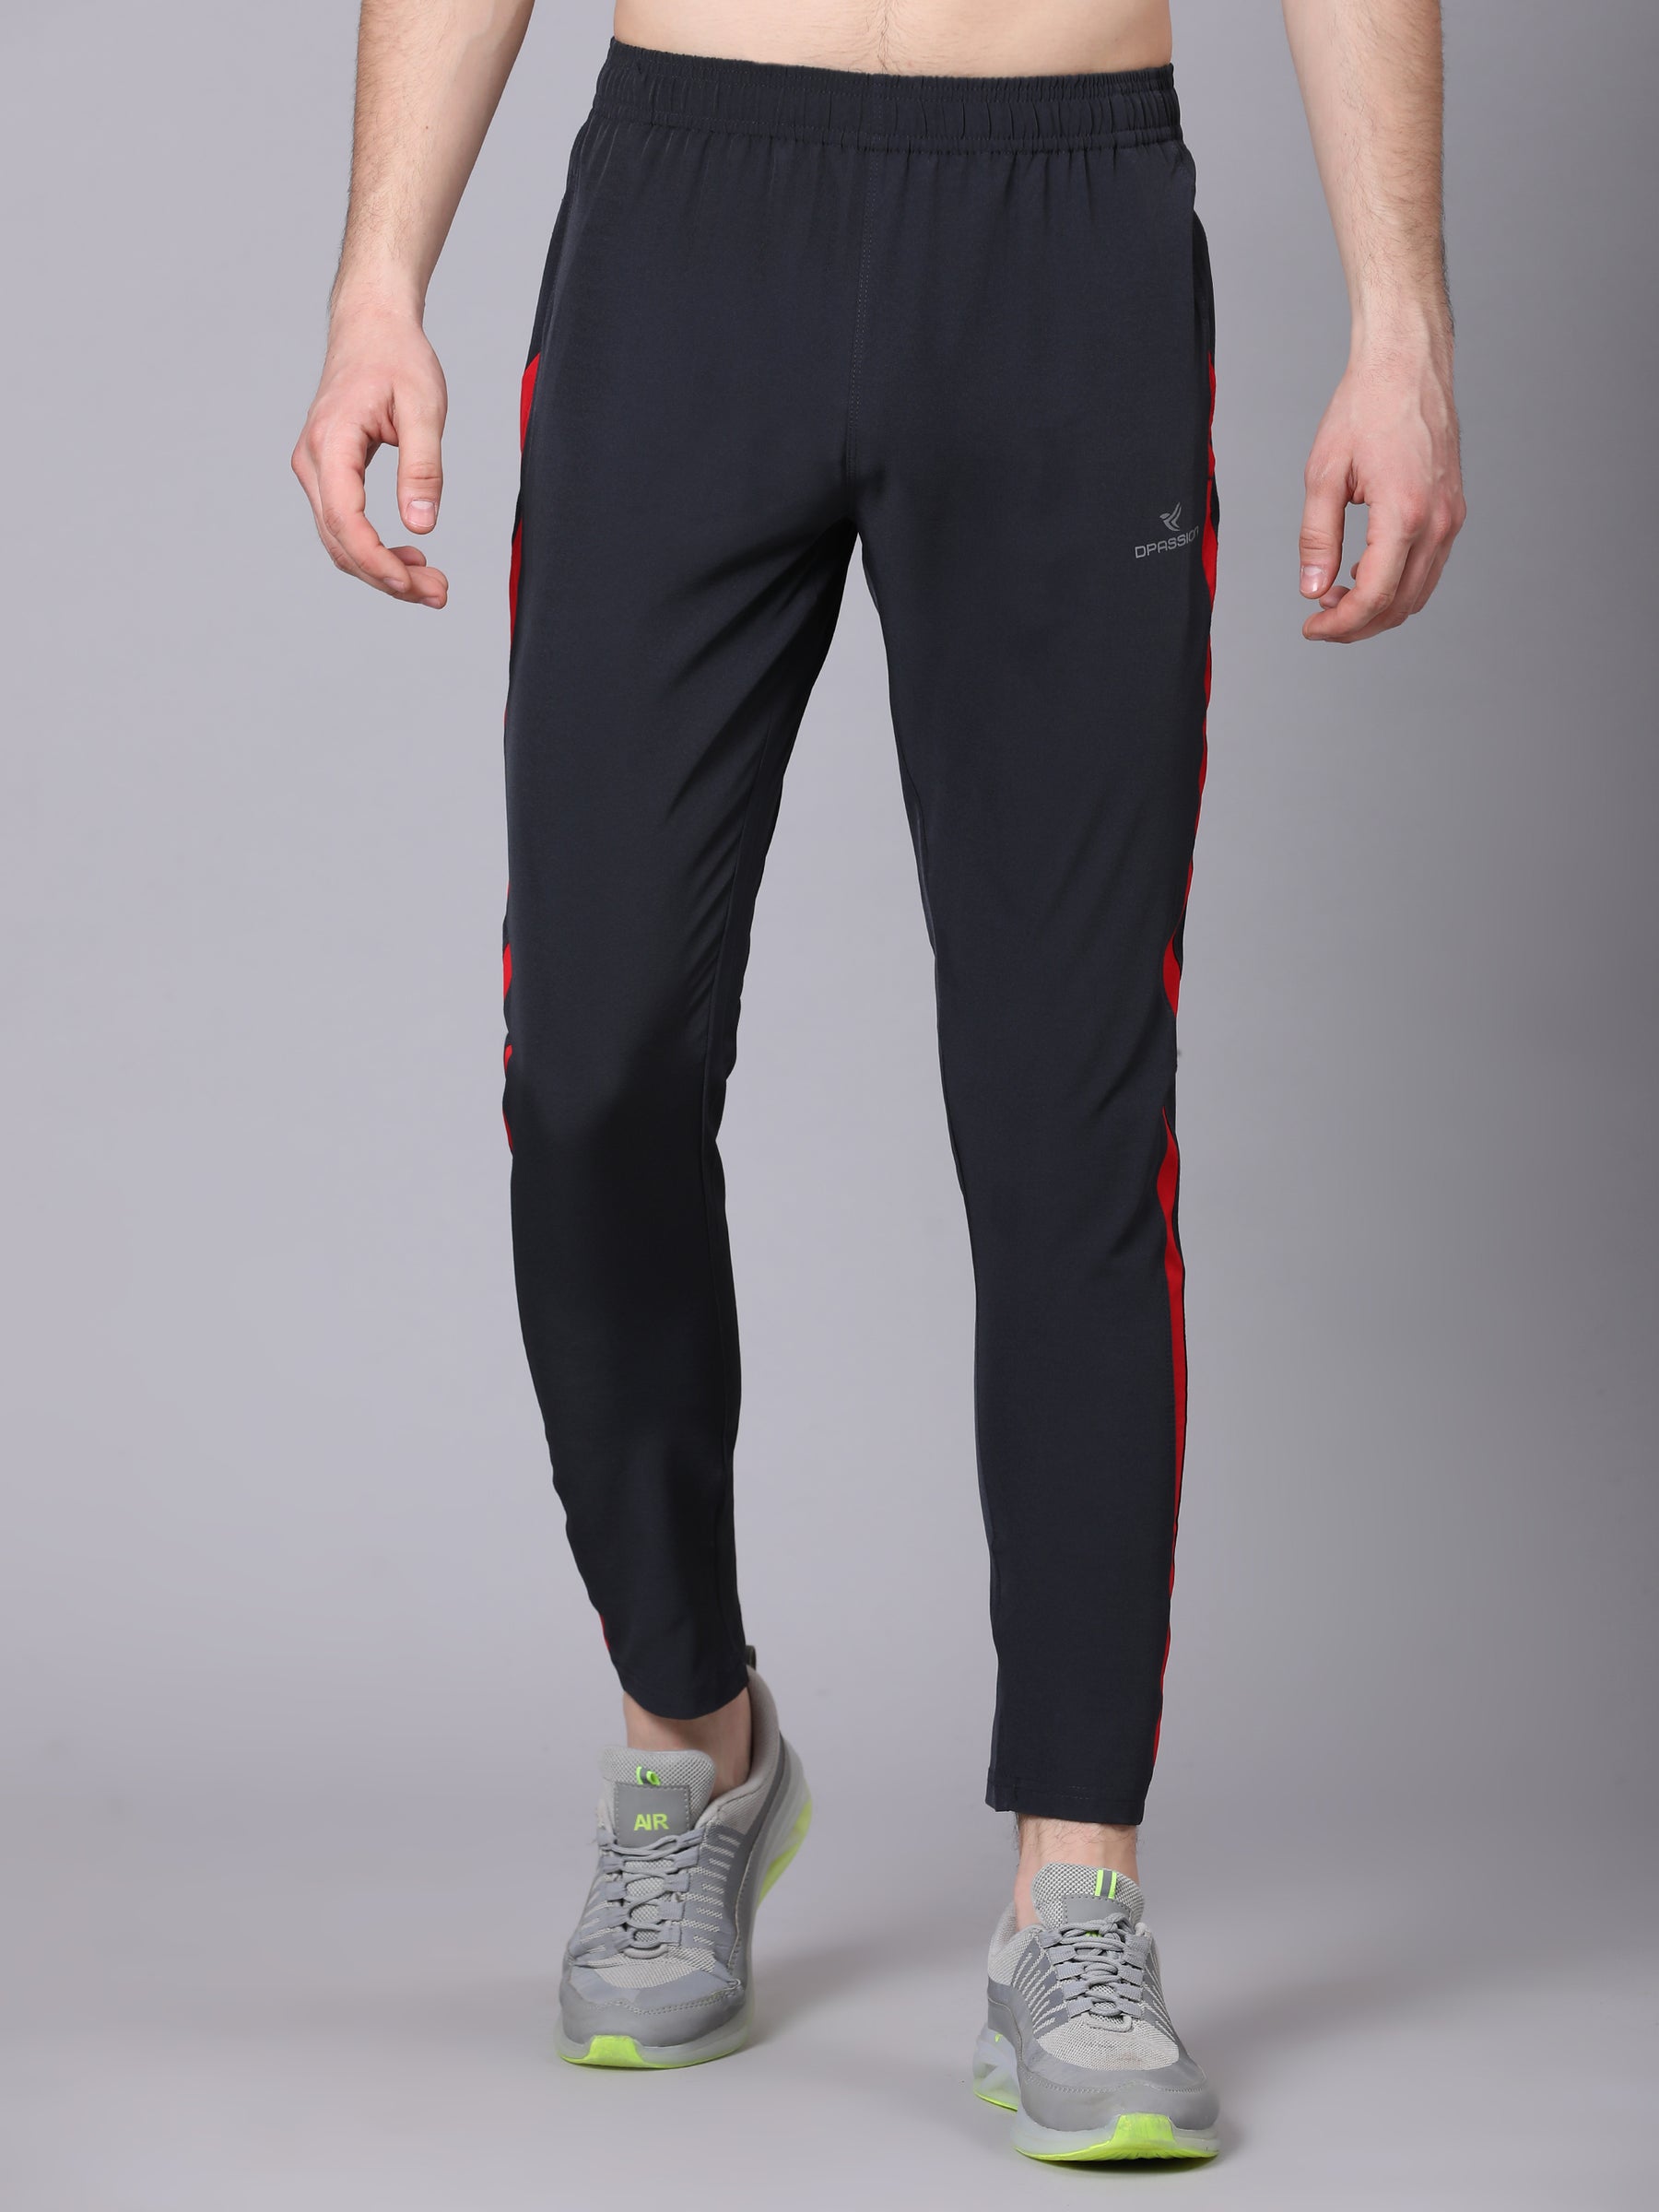 Sports Imported 4 WAY LYCRA TRACK Pant at Rs.280/Piece in surat offer by  Arsh Trendz